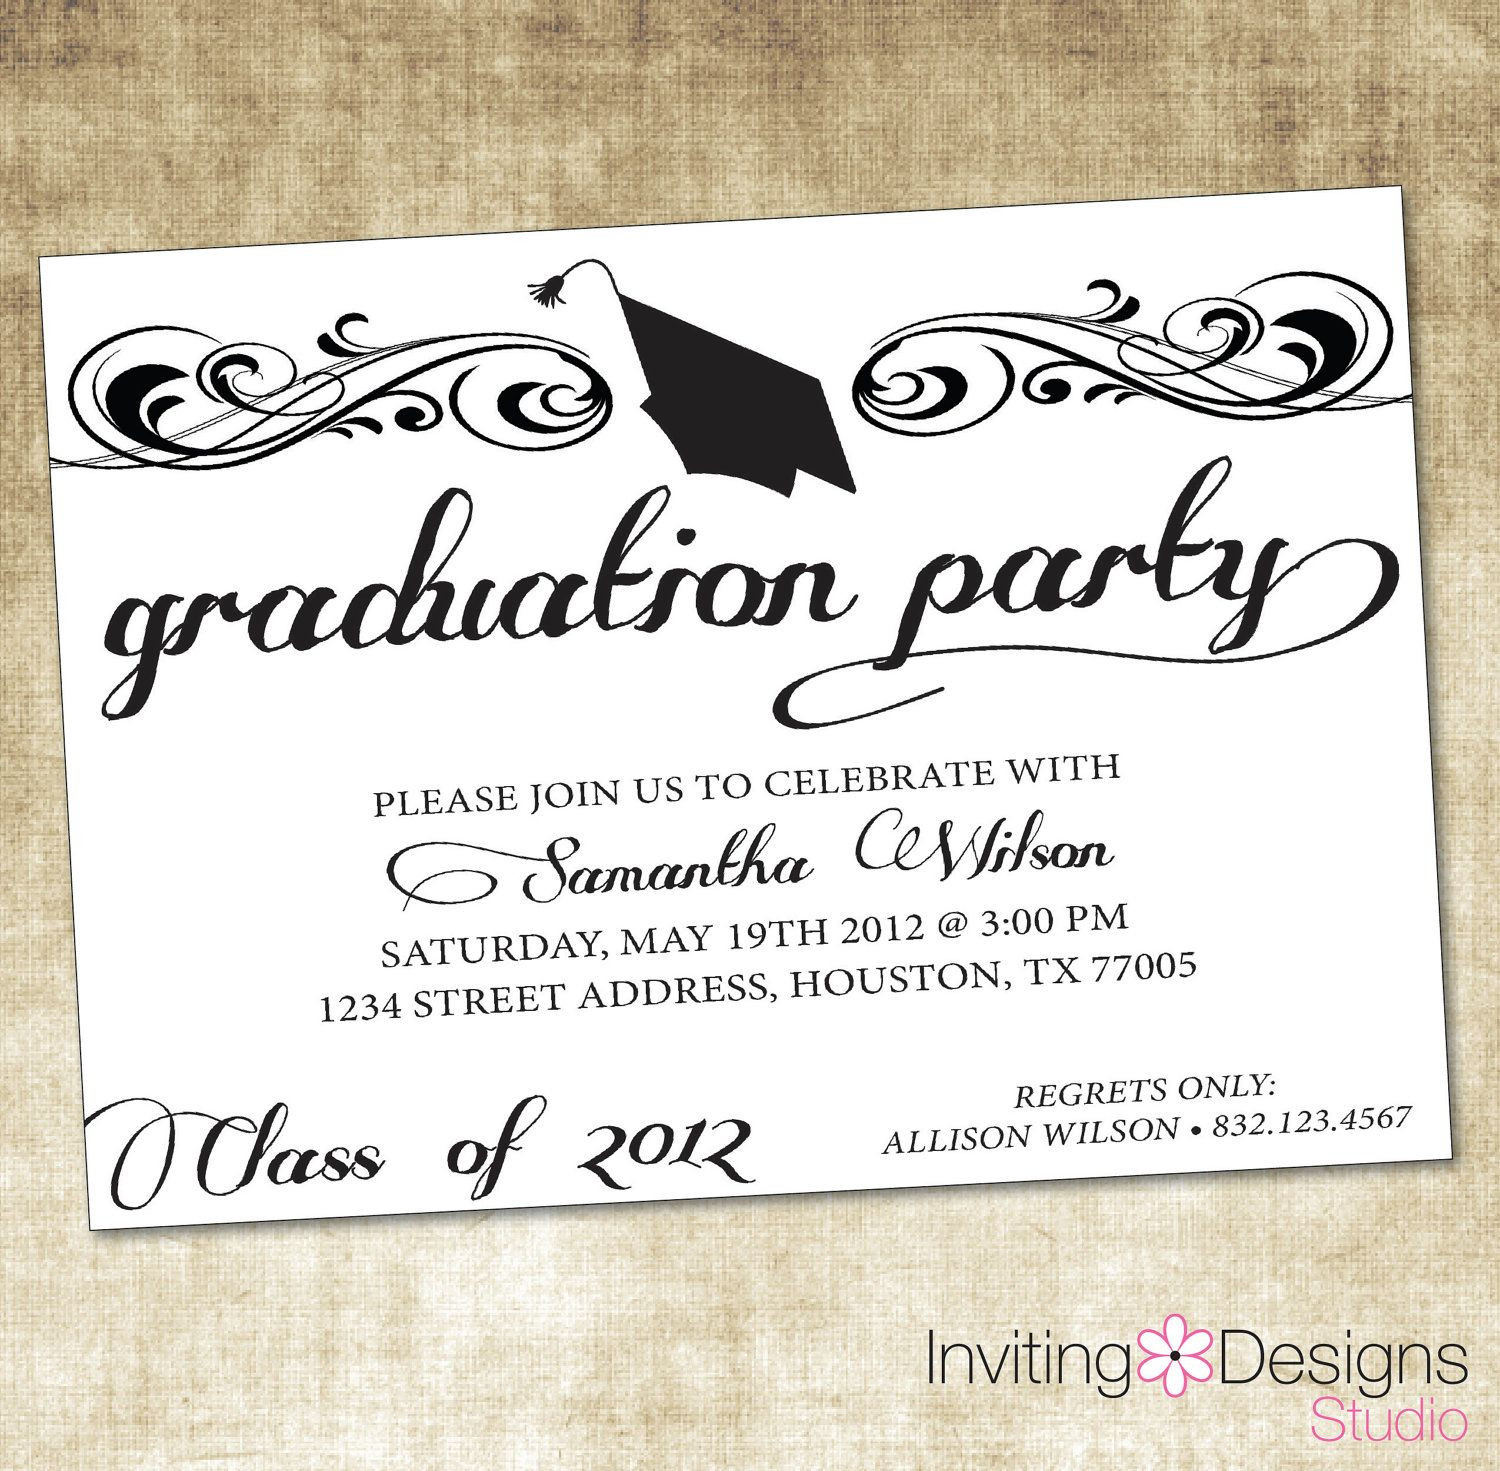 Ideas For Graduation Party Invitations
 Image result for graduation party invitation wording ideas